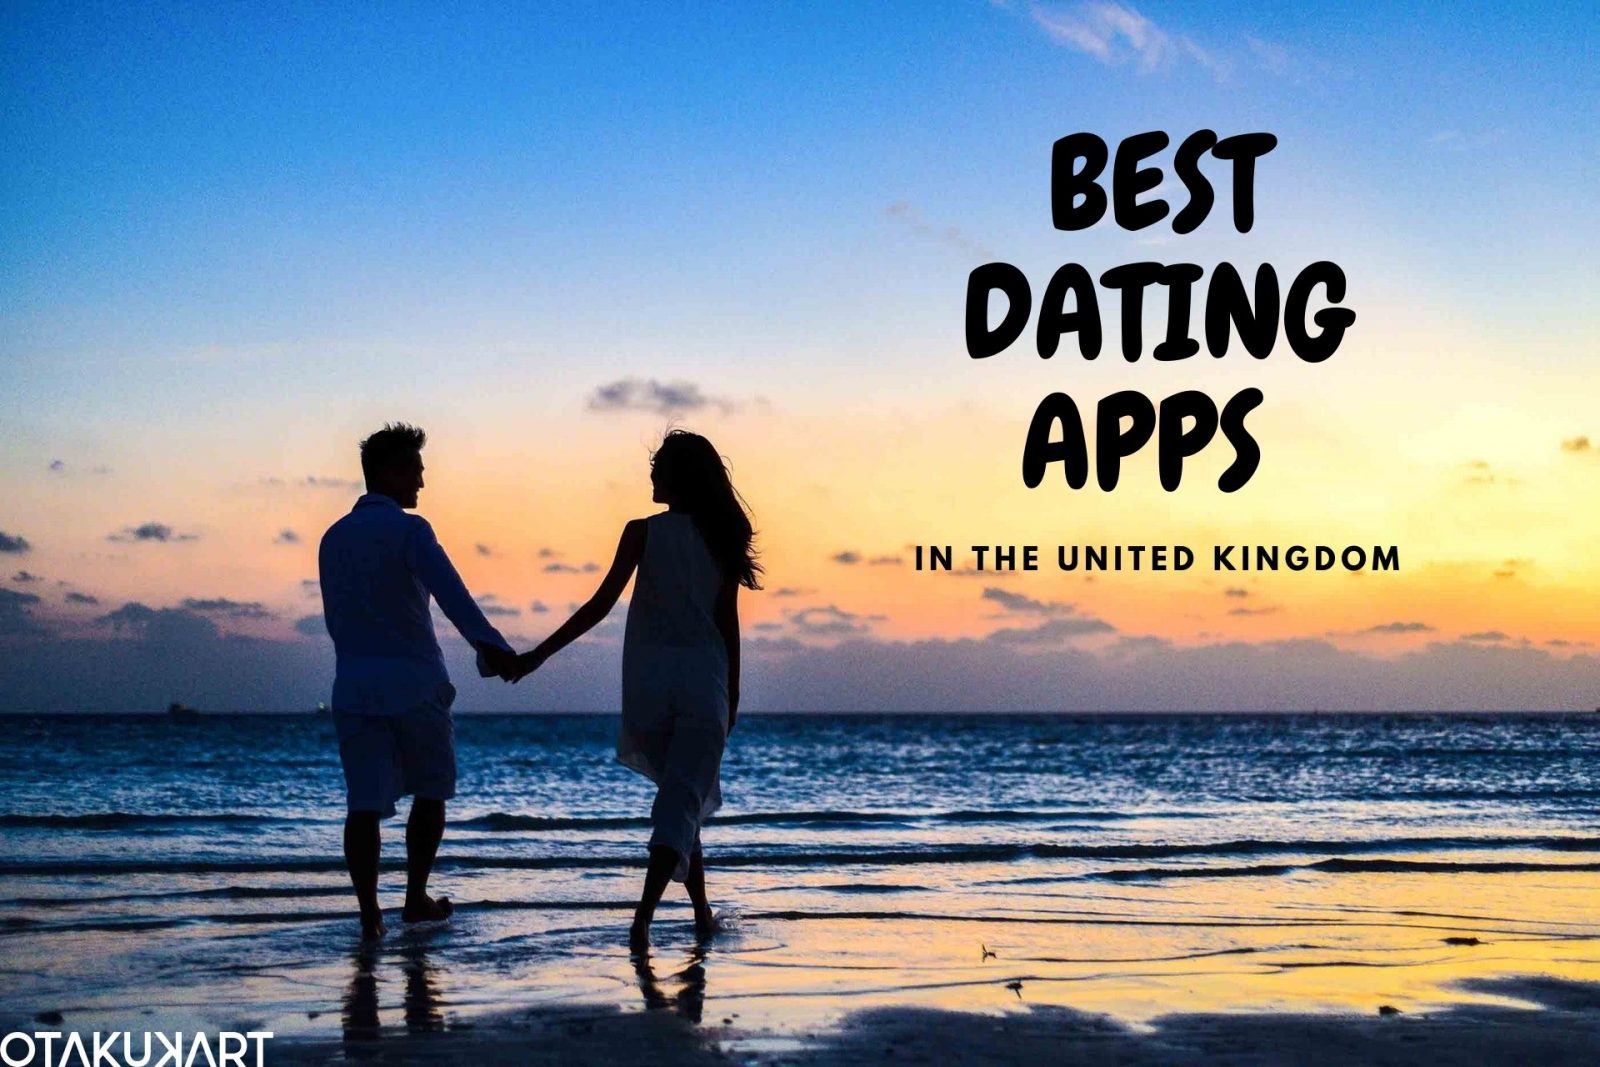 Best Dating Apps in the United Kingdom